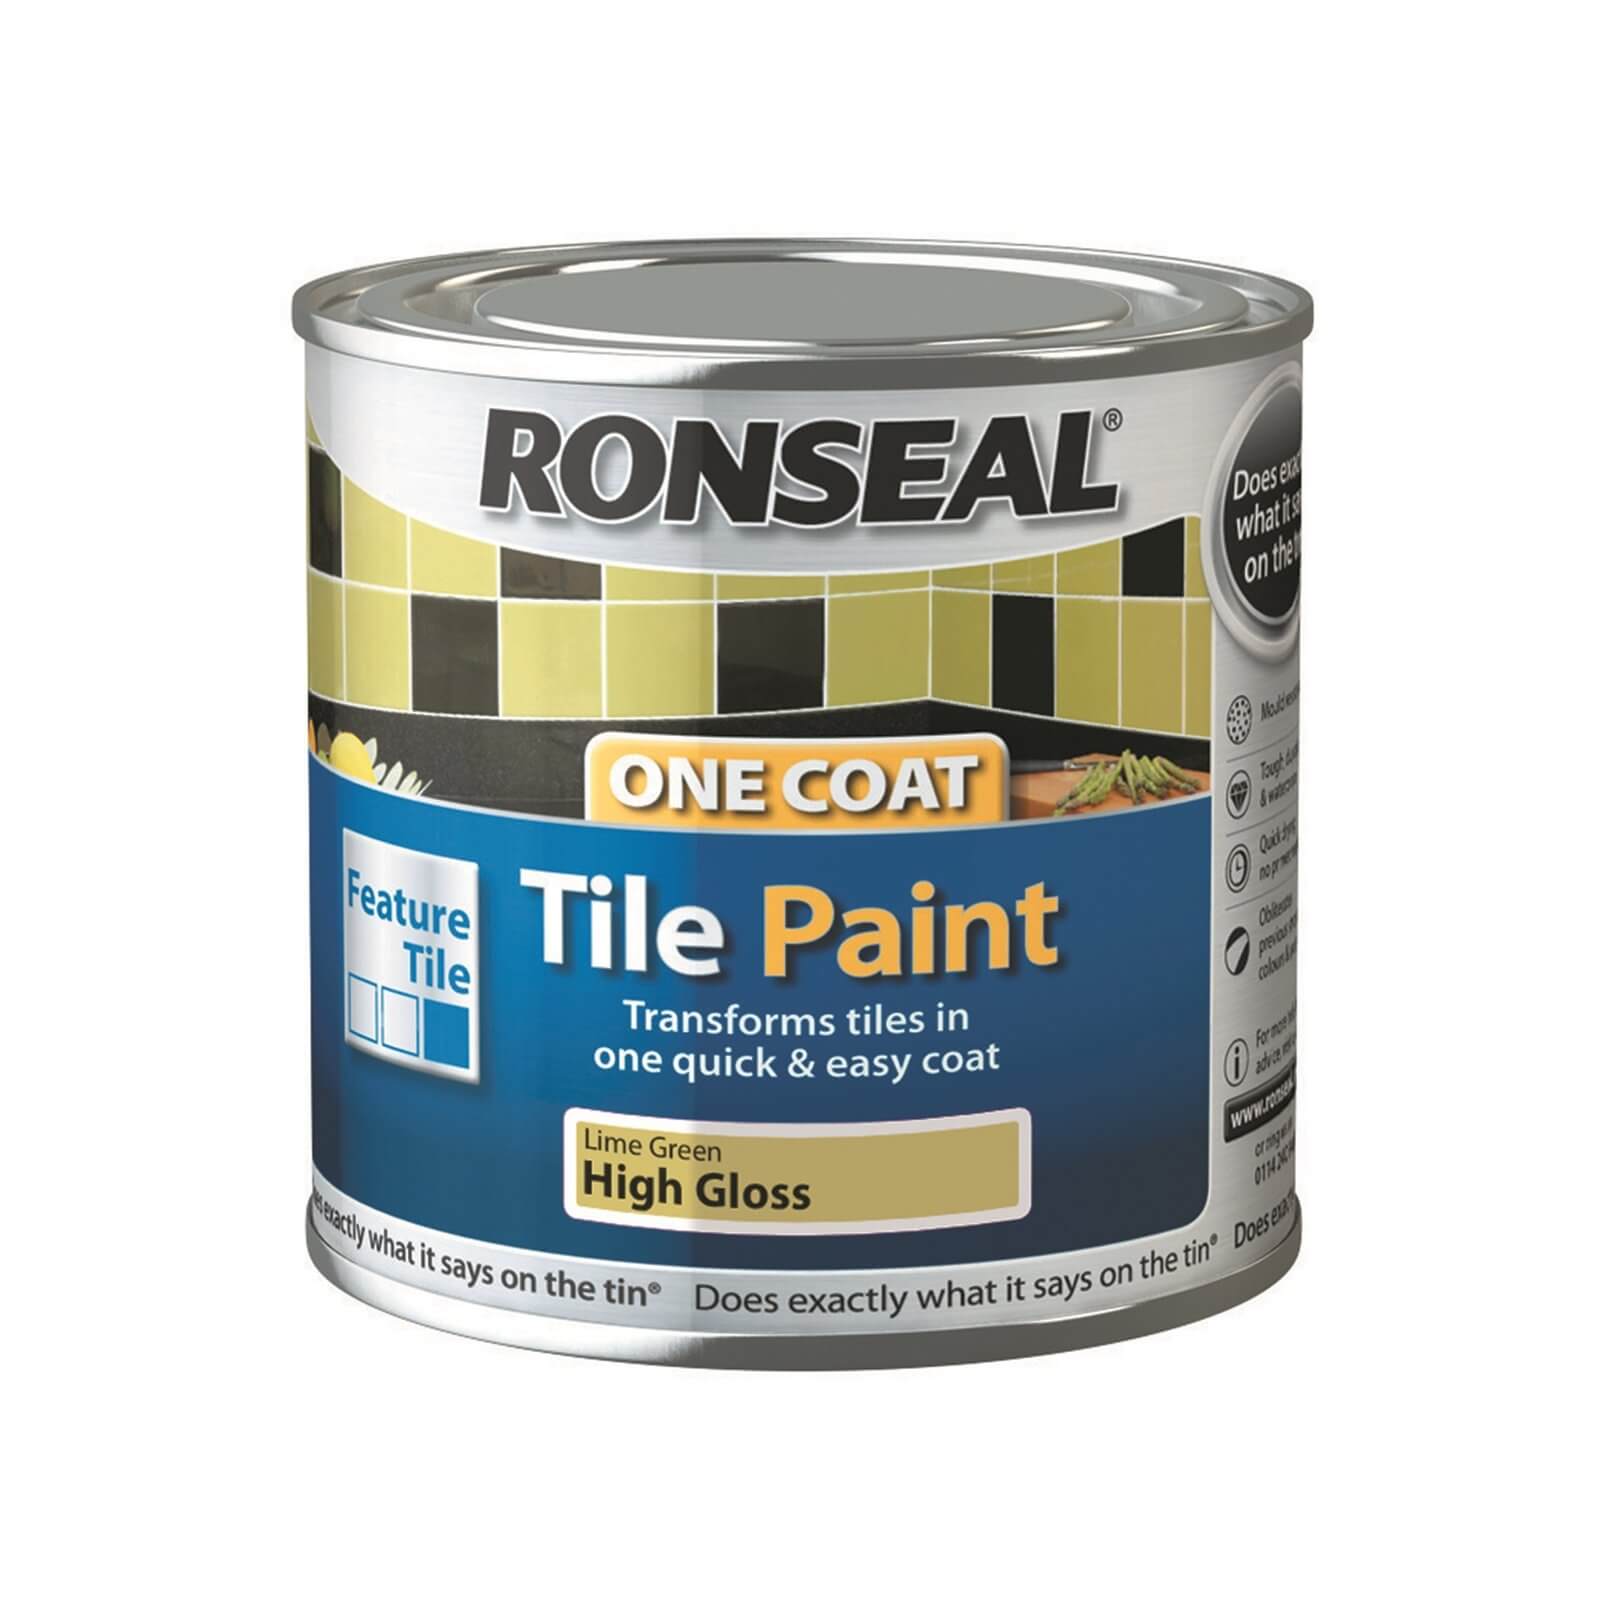 Ronseal One Coat Tile Paint Lime Green High Gloss 250ml